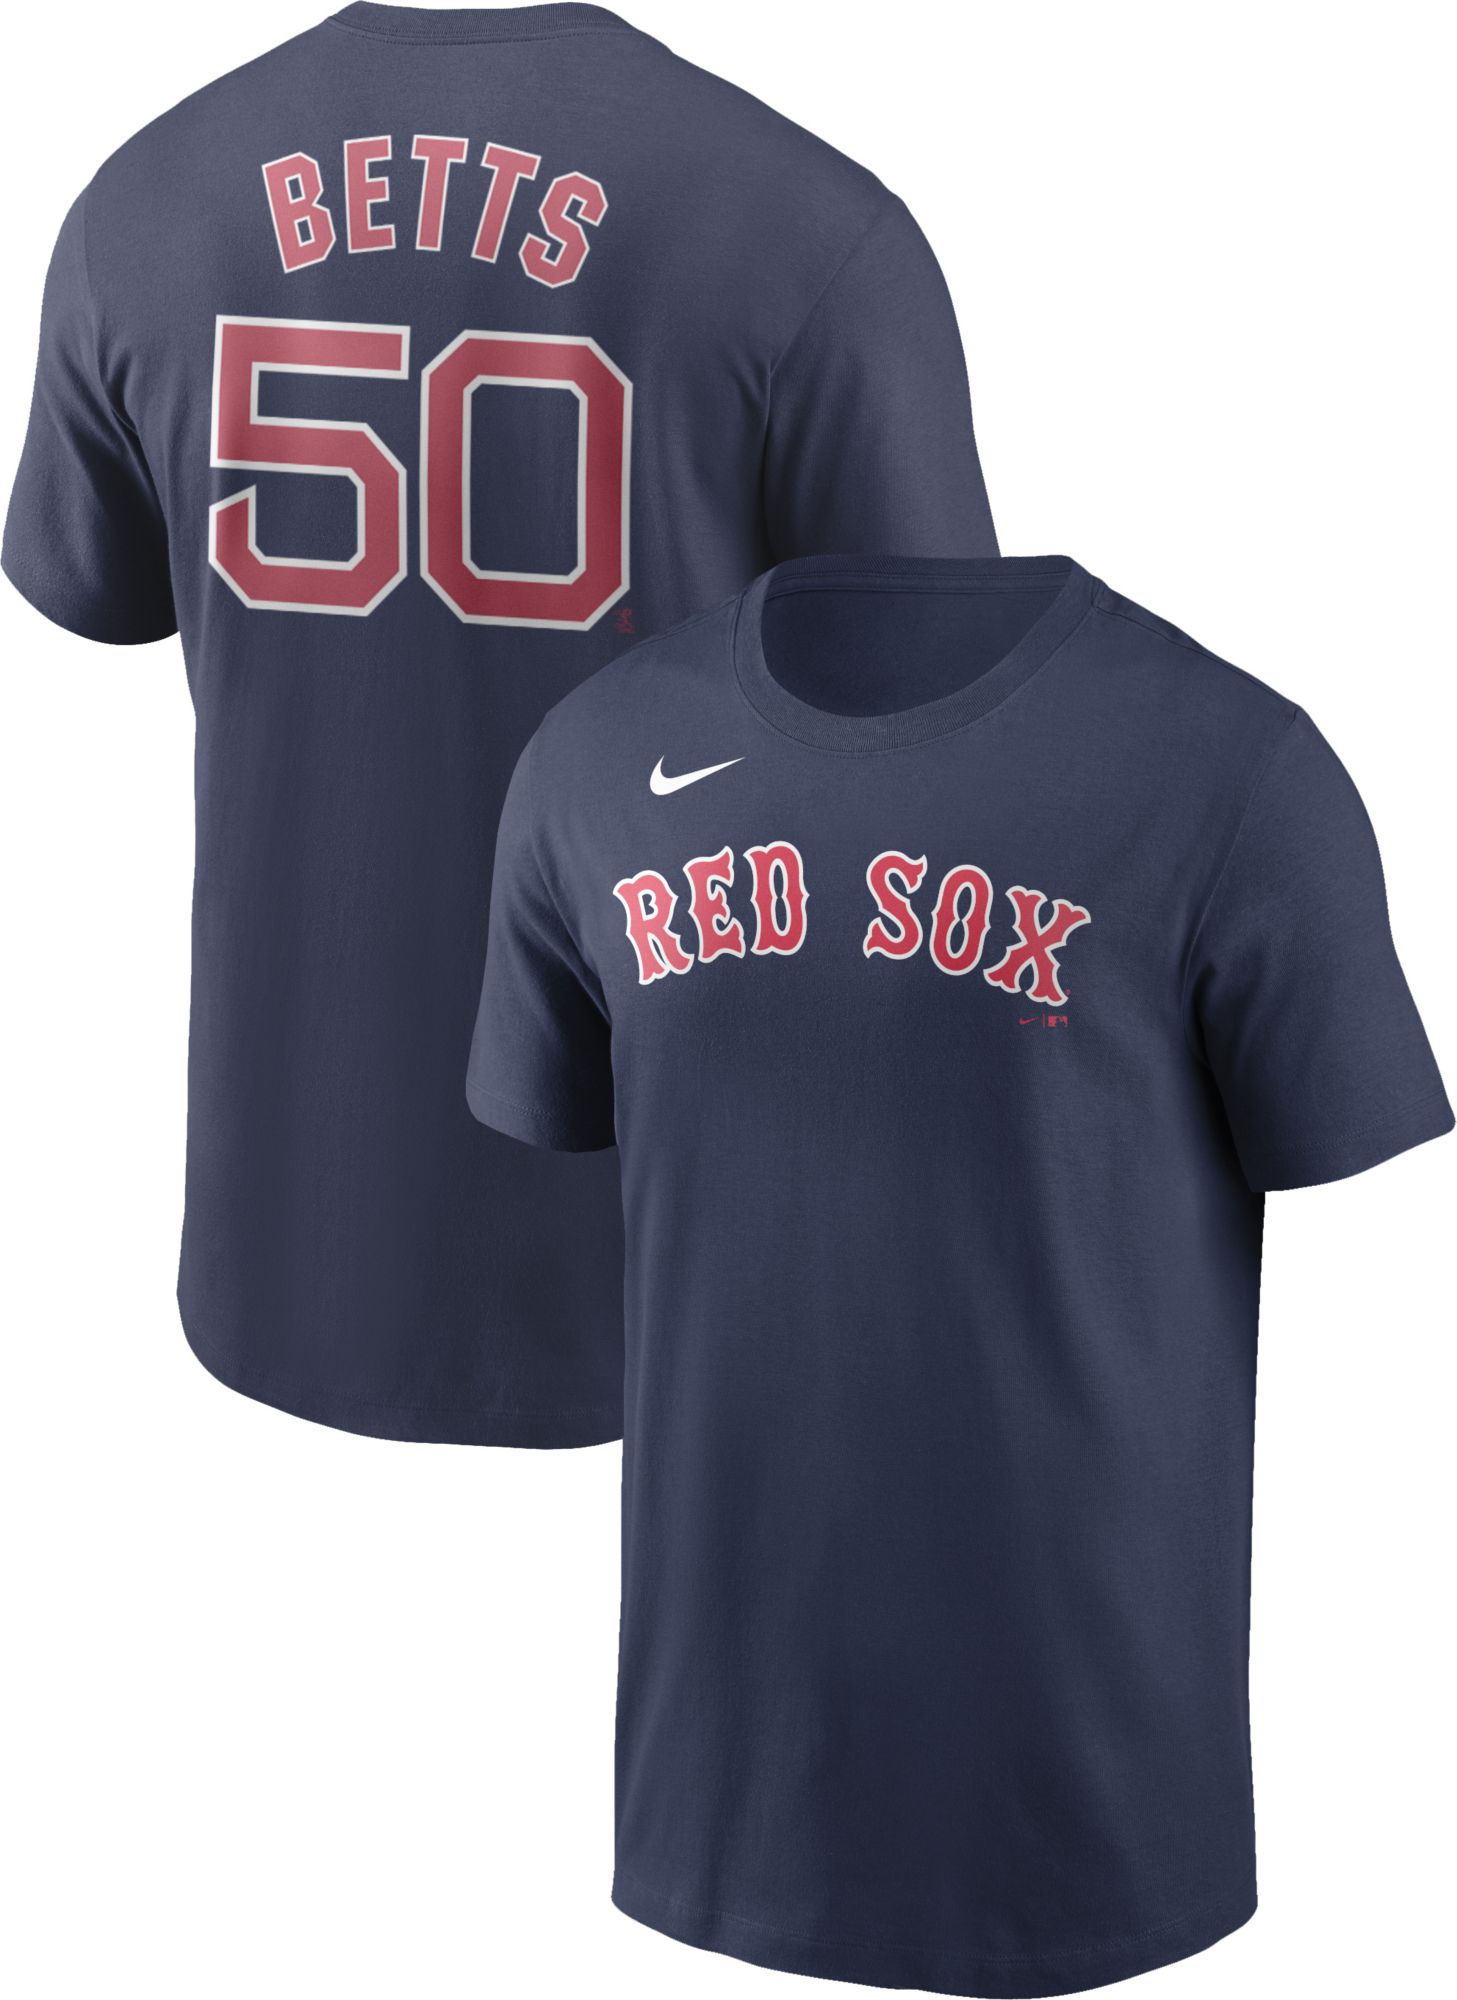 mookie red sox shirt